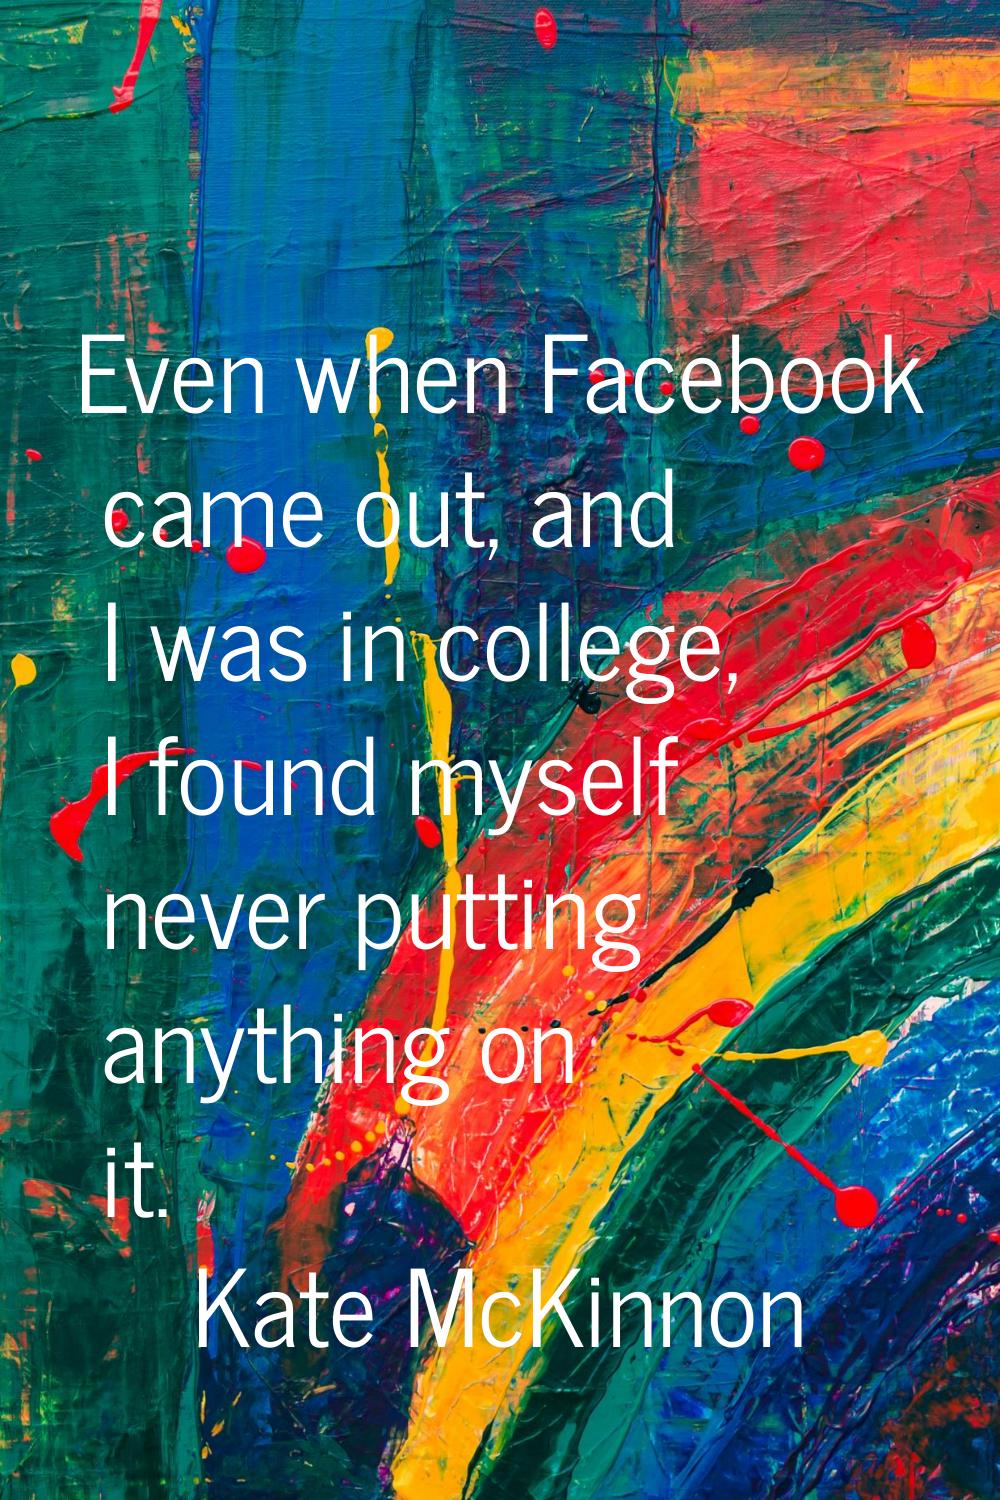 Even when Facebook came out, and I was in college, I found myself never putting anything on it.